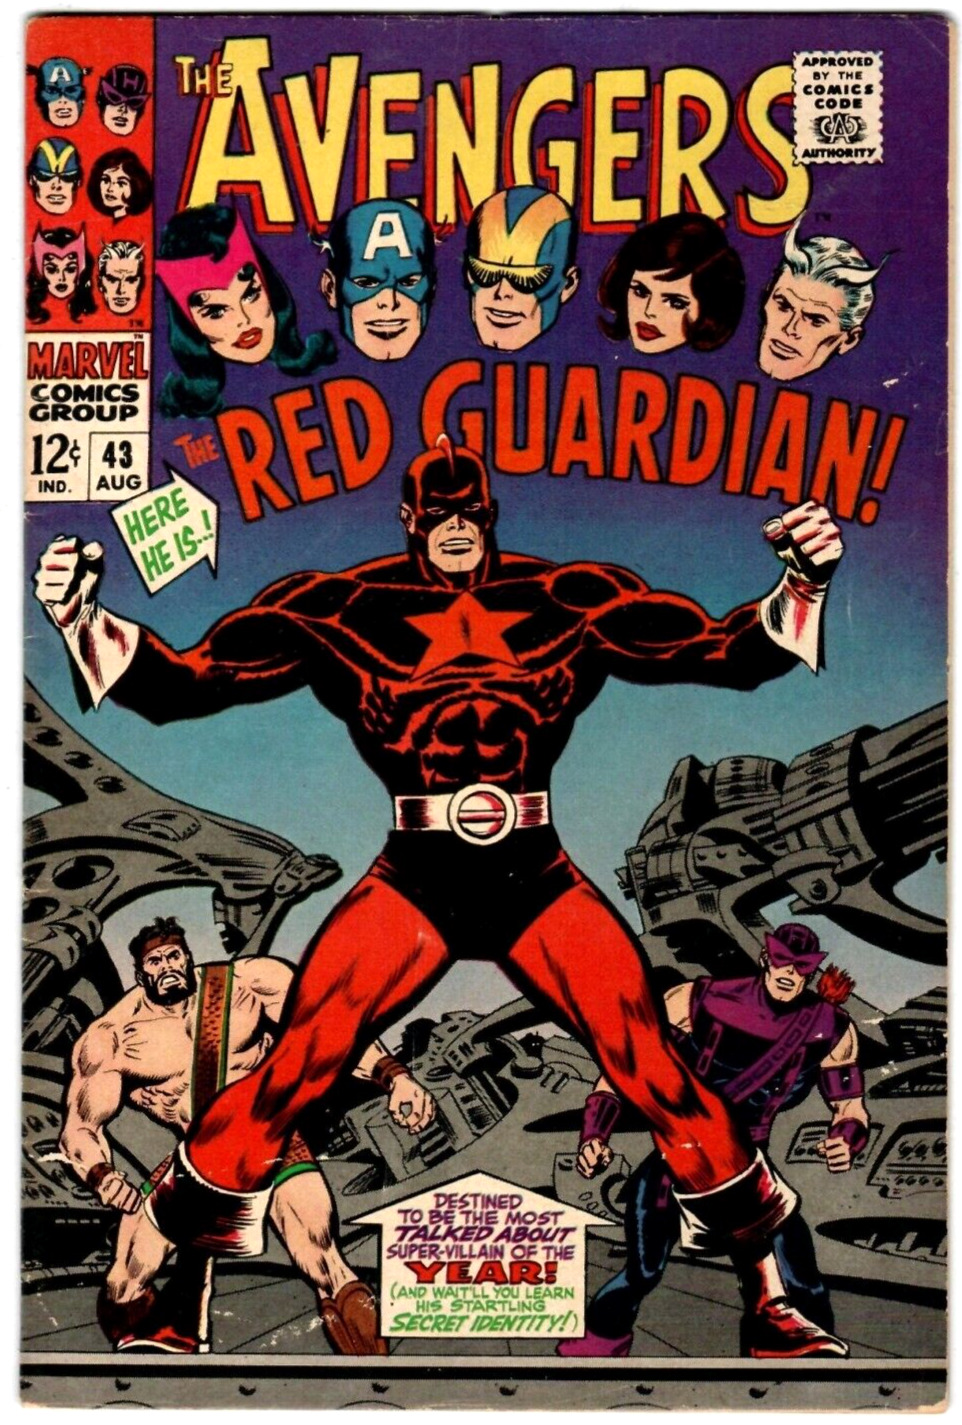 The Avengers # 43  (6.0)  8/1967  Marvel  Red Guardian App. 12c    🚚